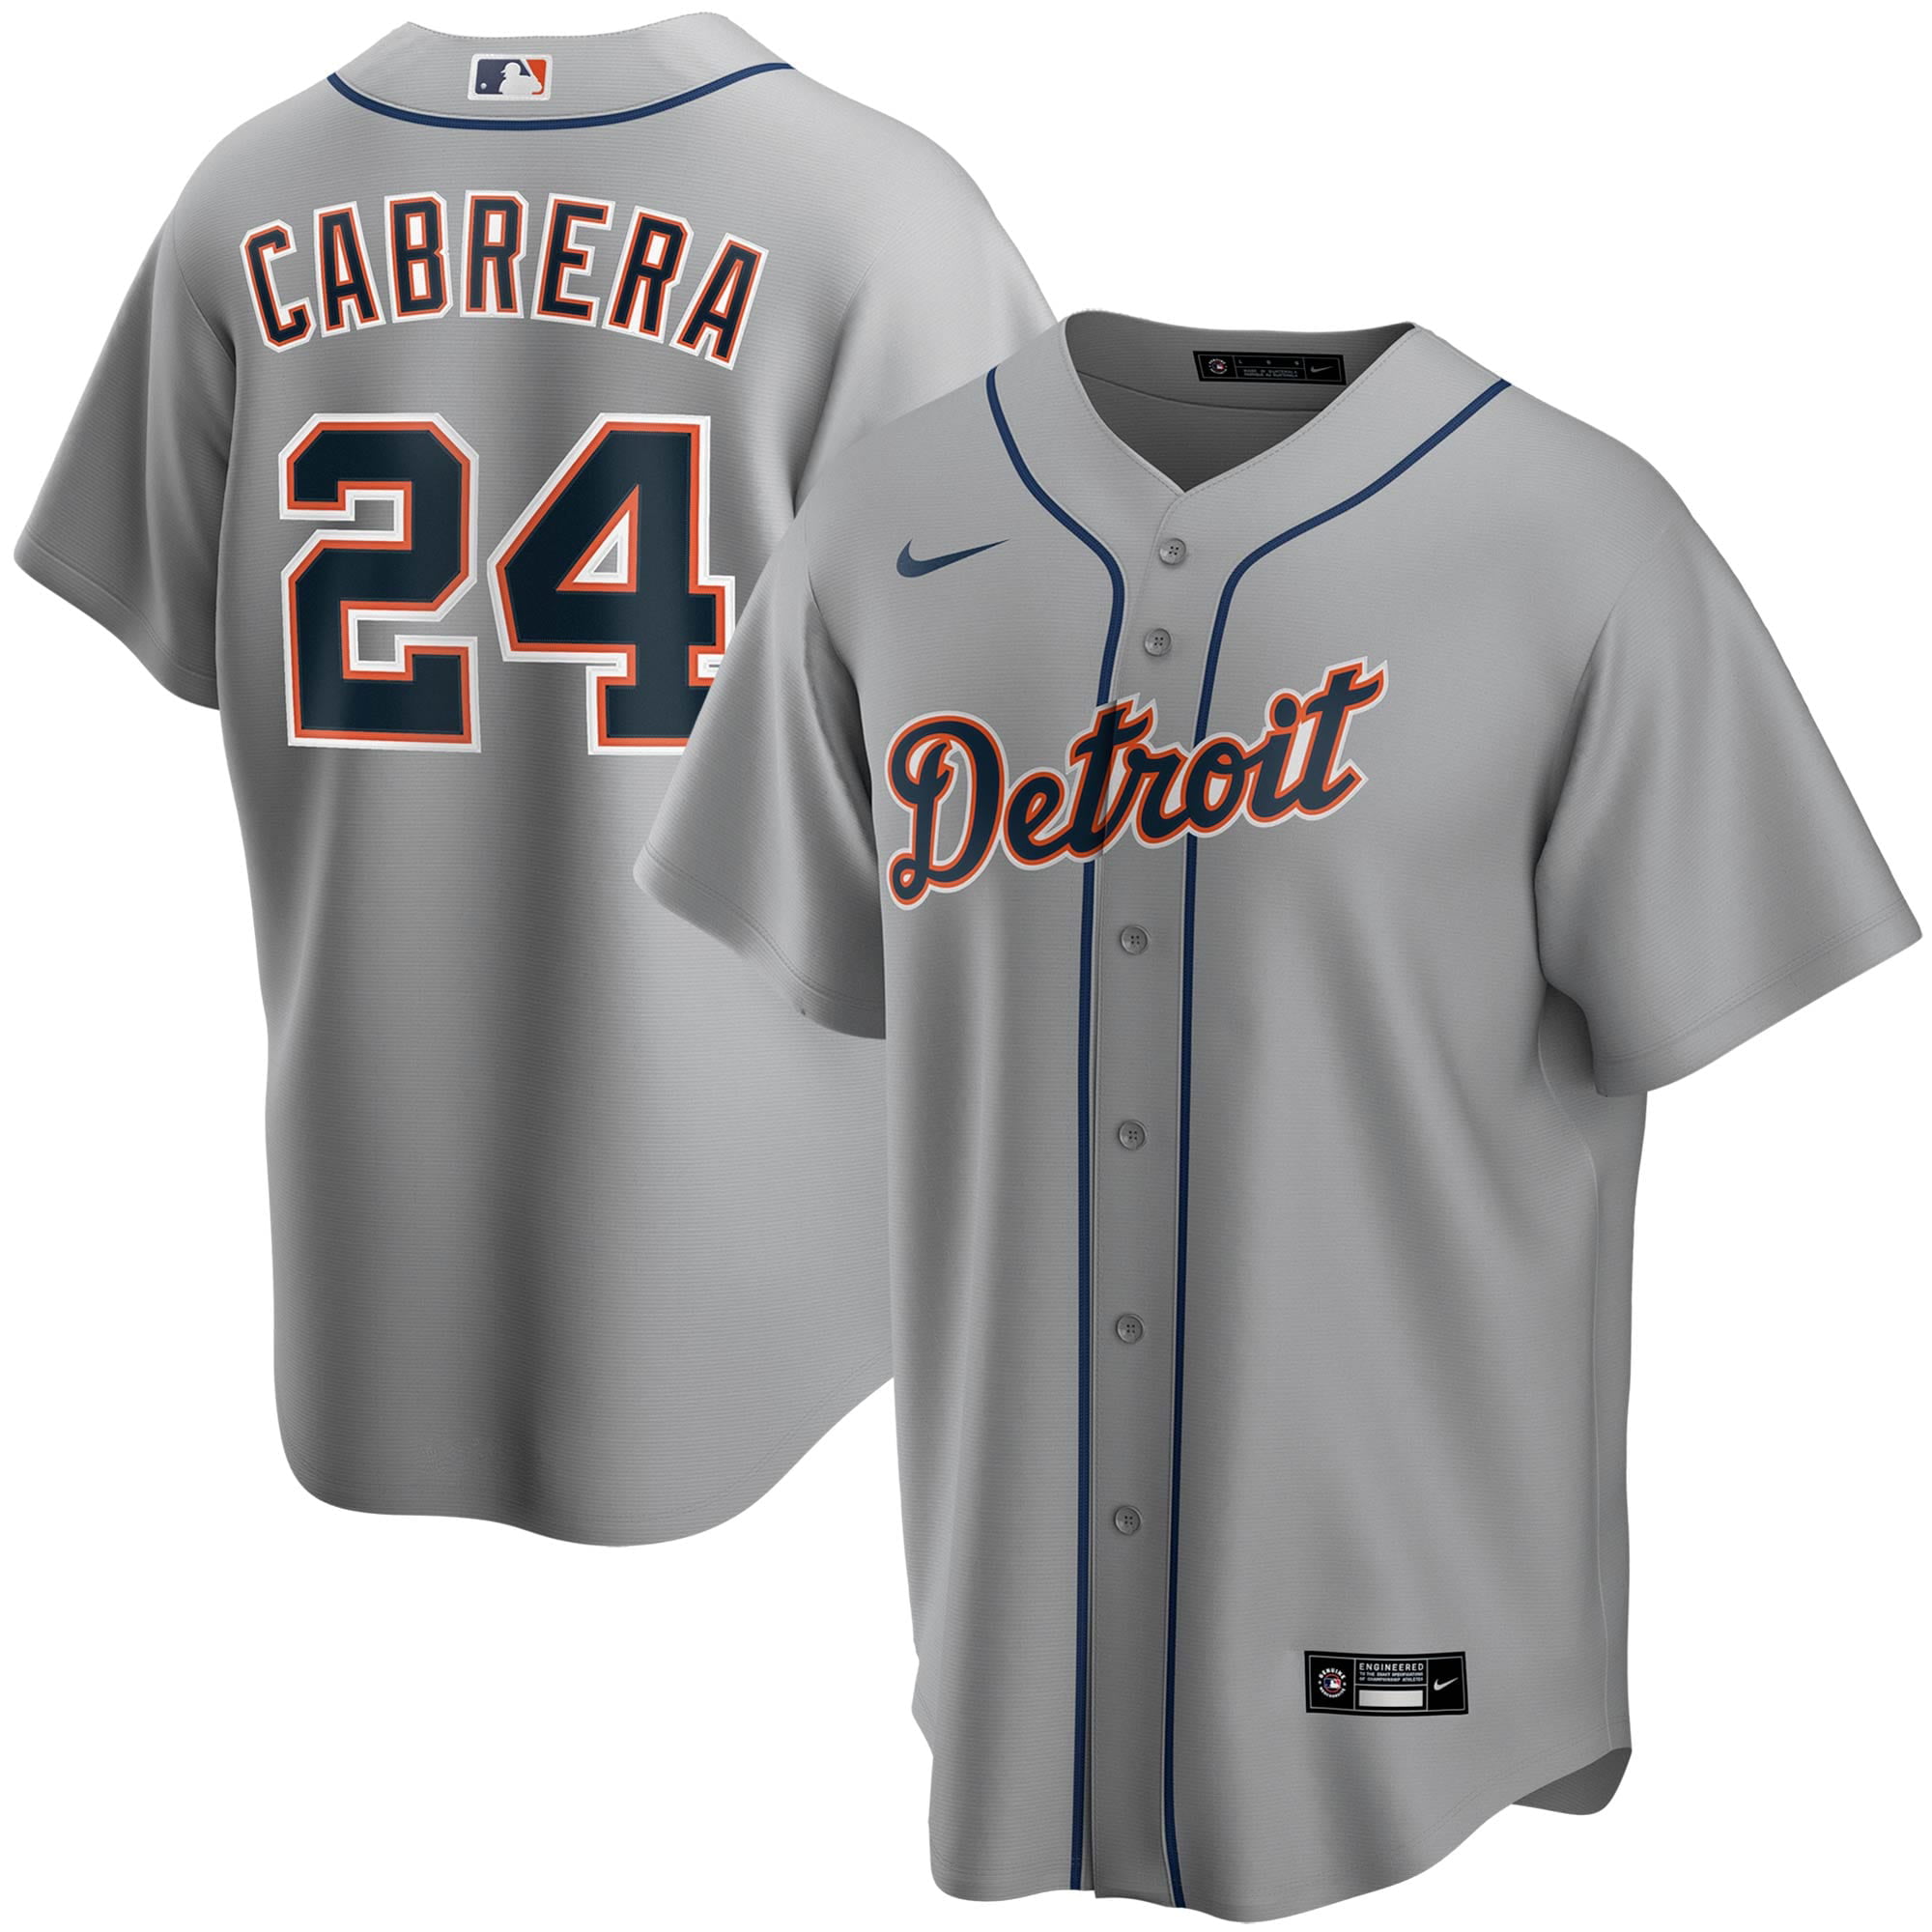 new detroit tigers jersey